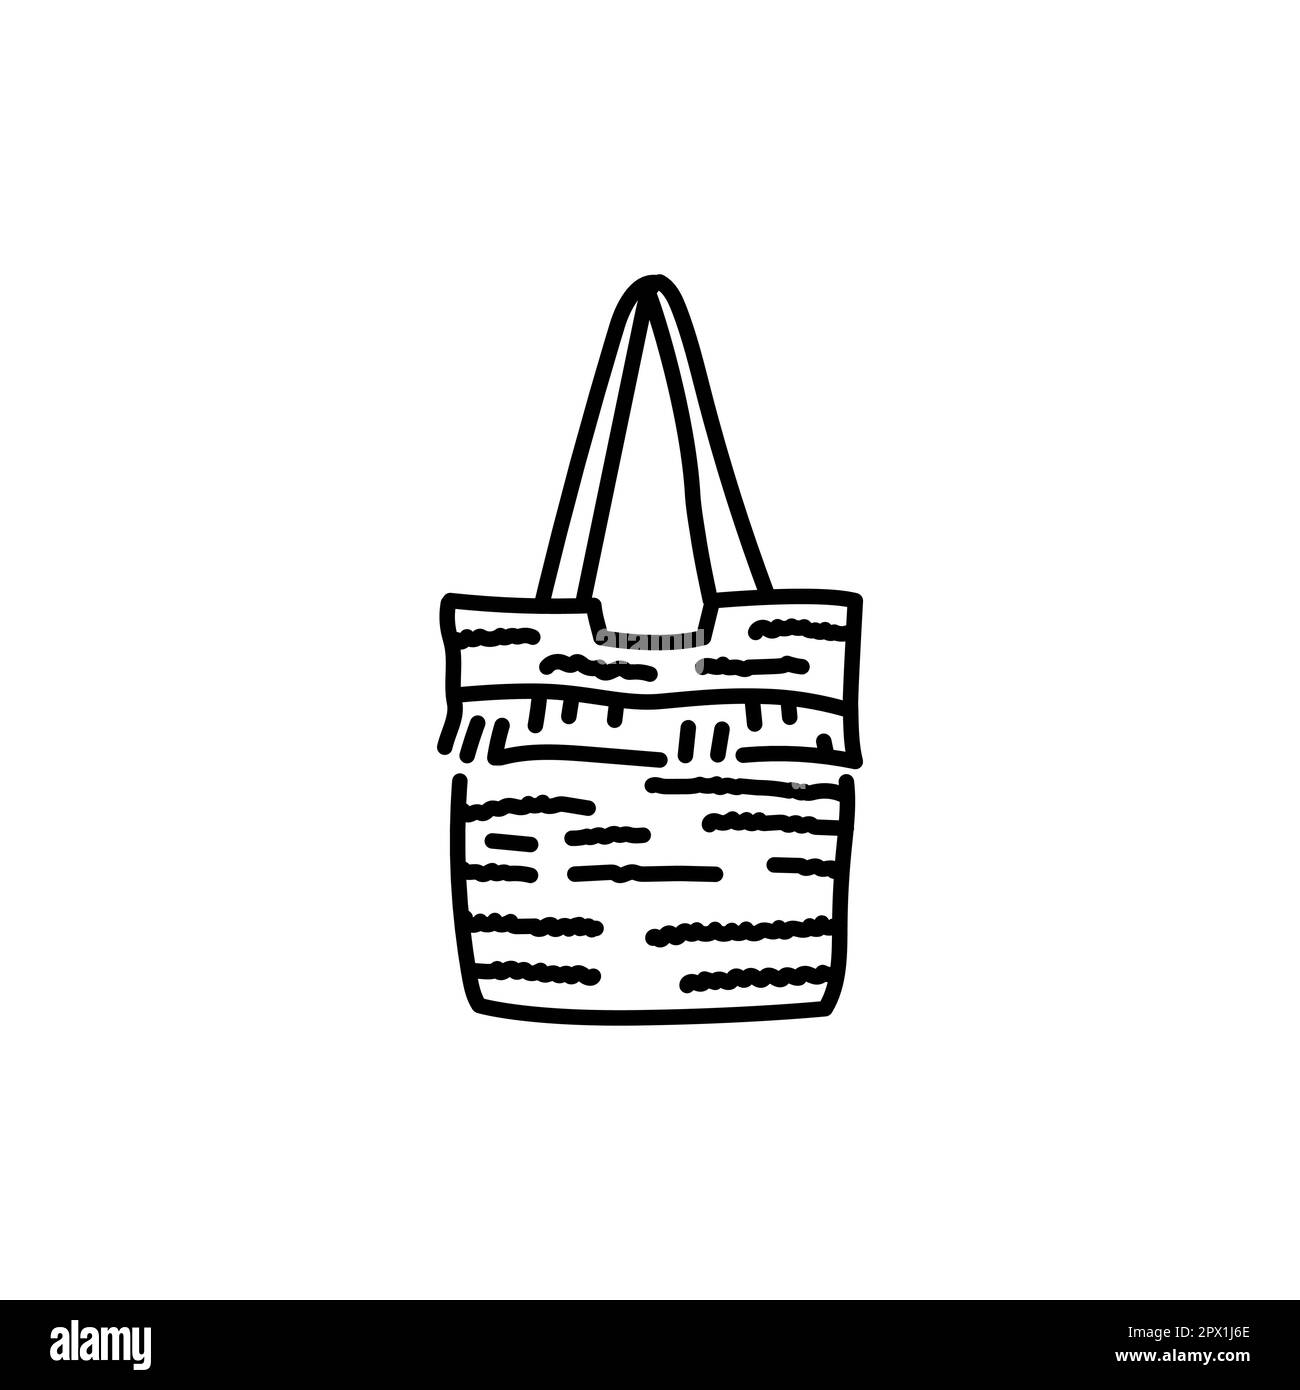 Summer beach bag black line icon. Pictogram for web page, mobile app ...